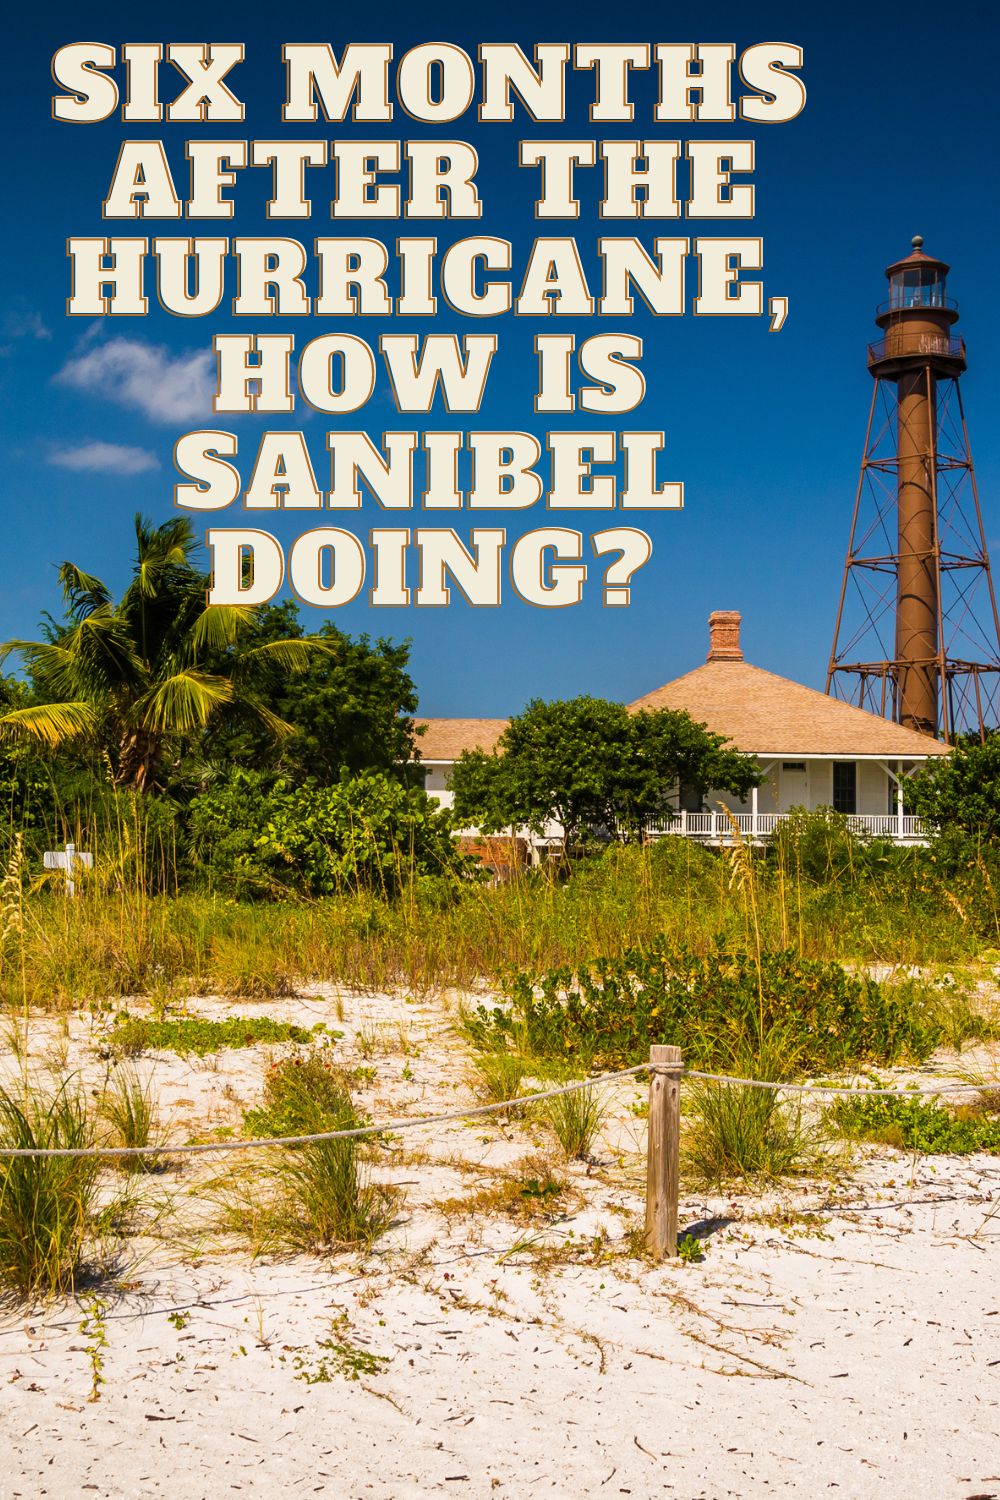 Six Months After the Hurricane, How is Sanibel Doing?